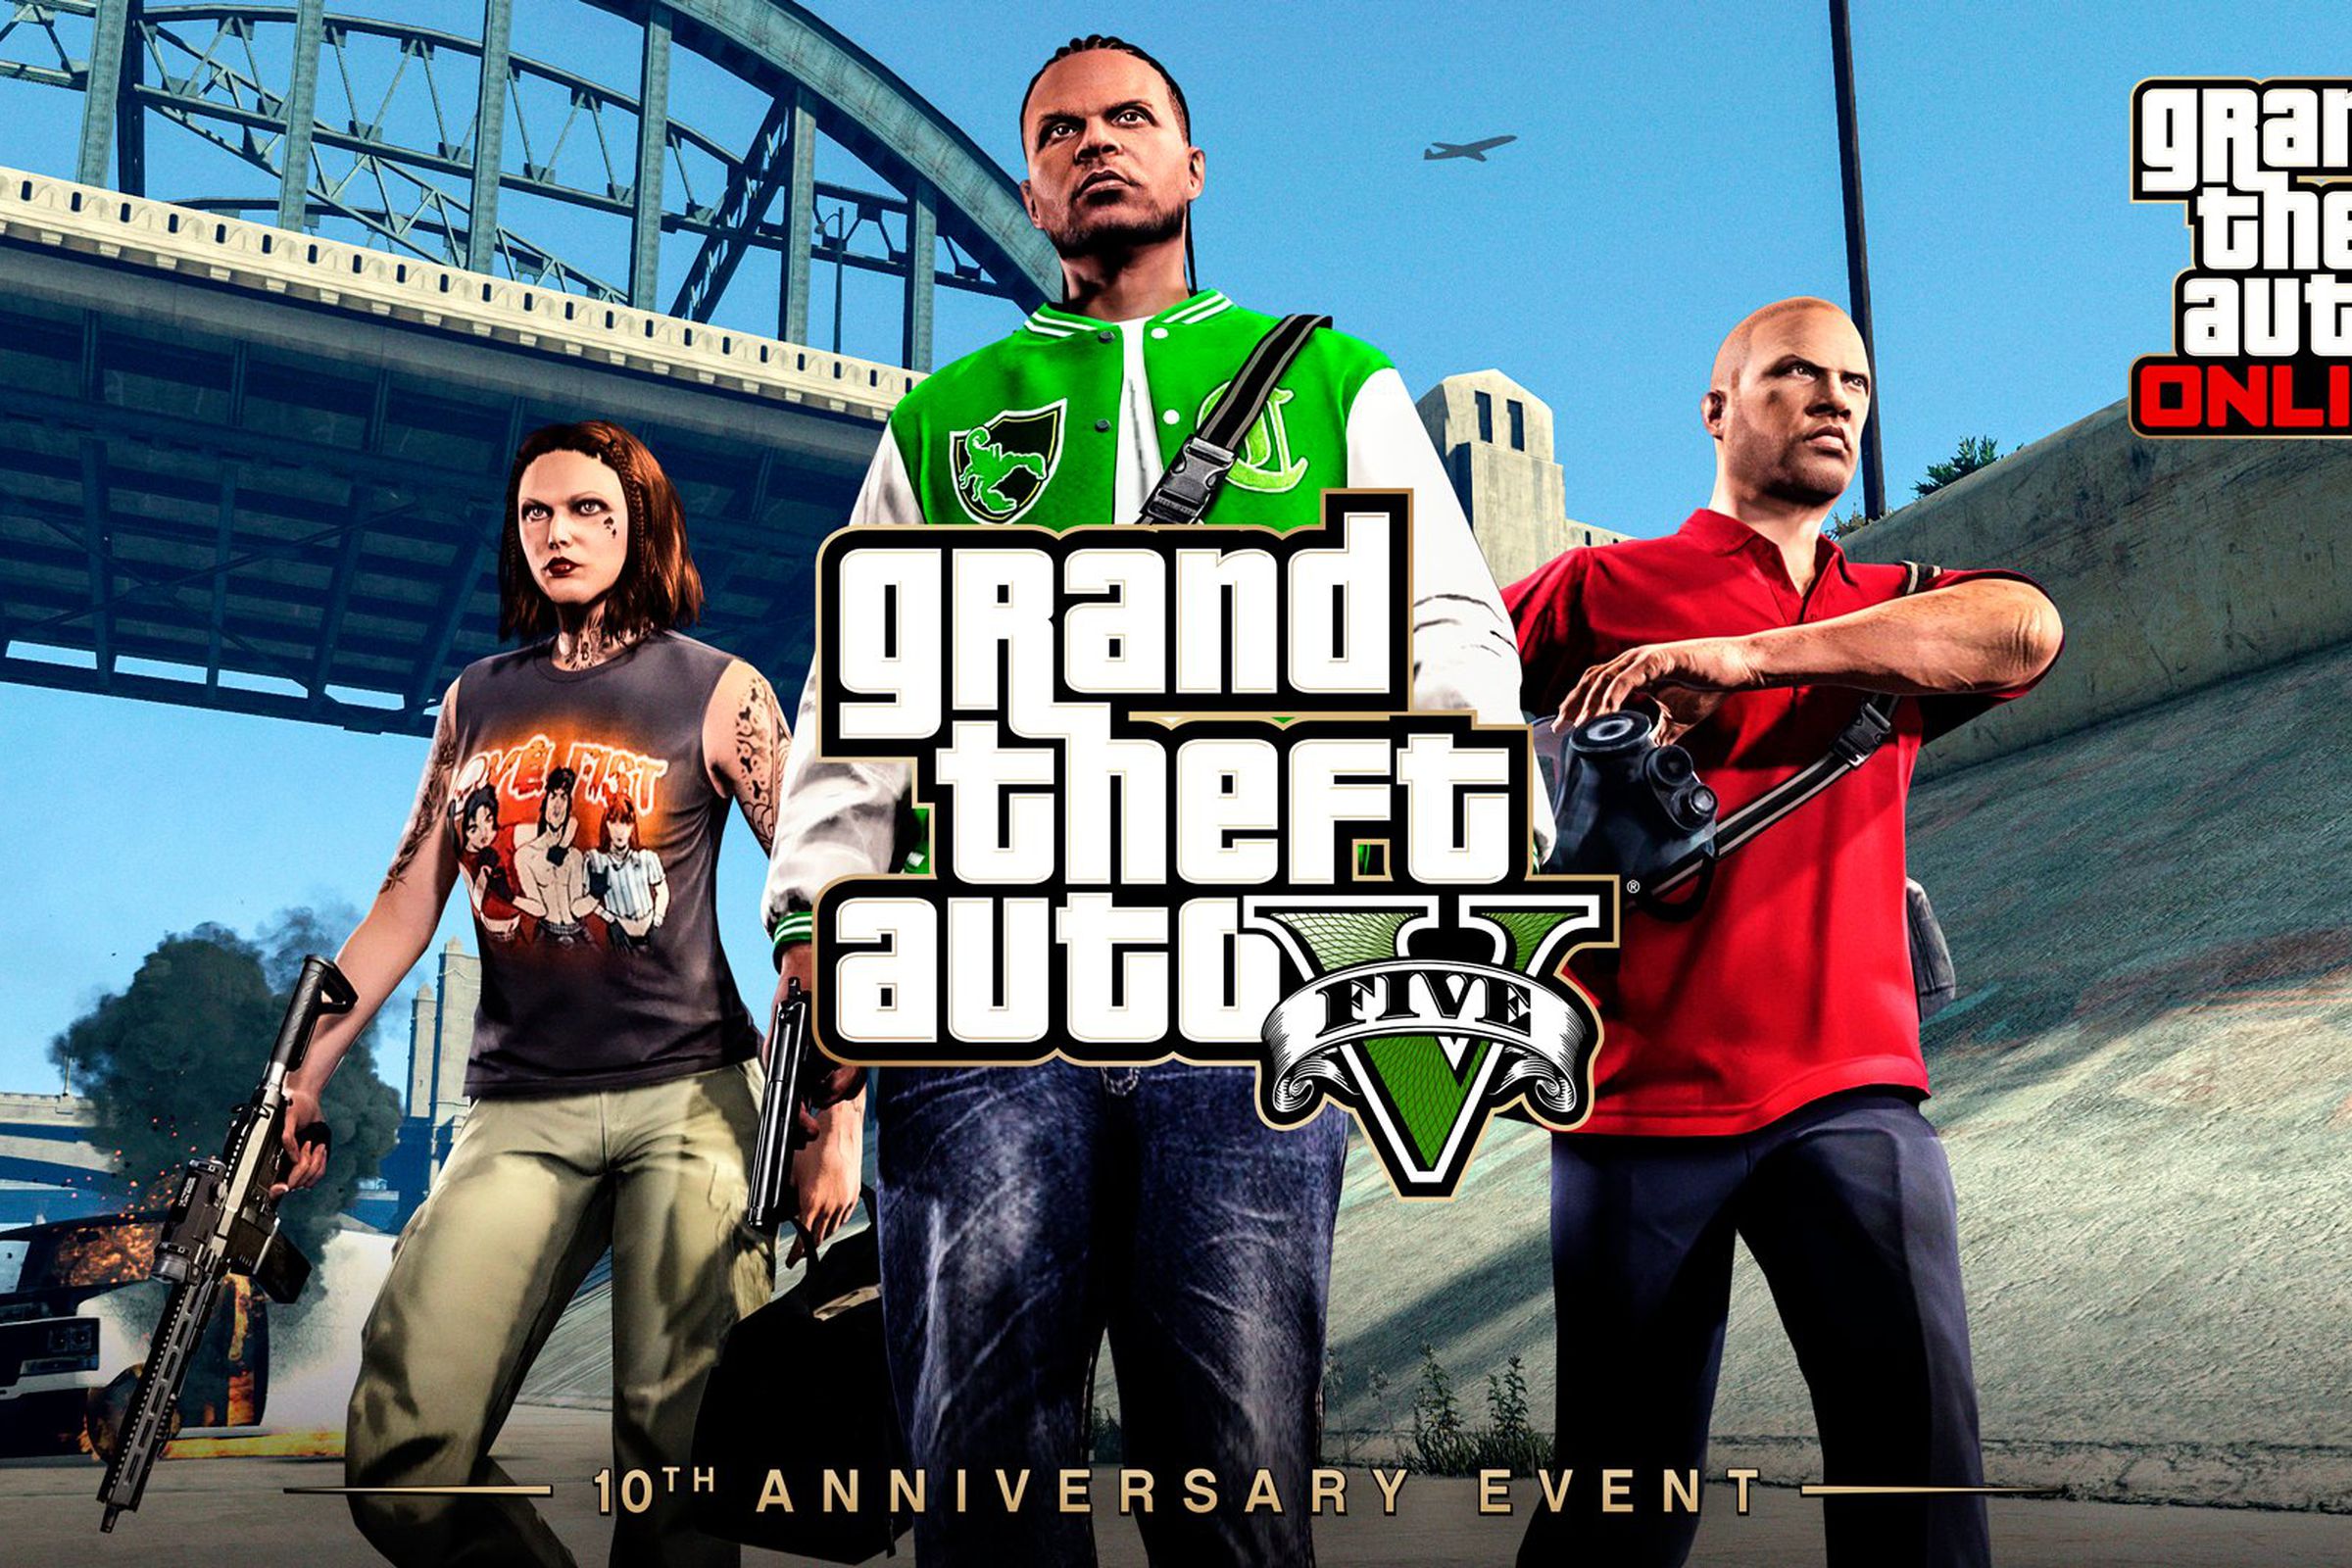 A promotional image for Grand Theft Auto V’s tenth anniversary event.